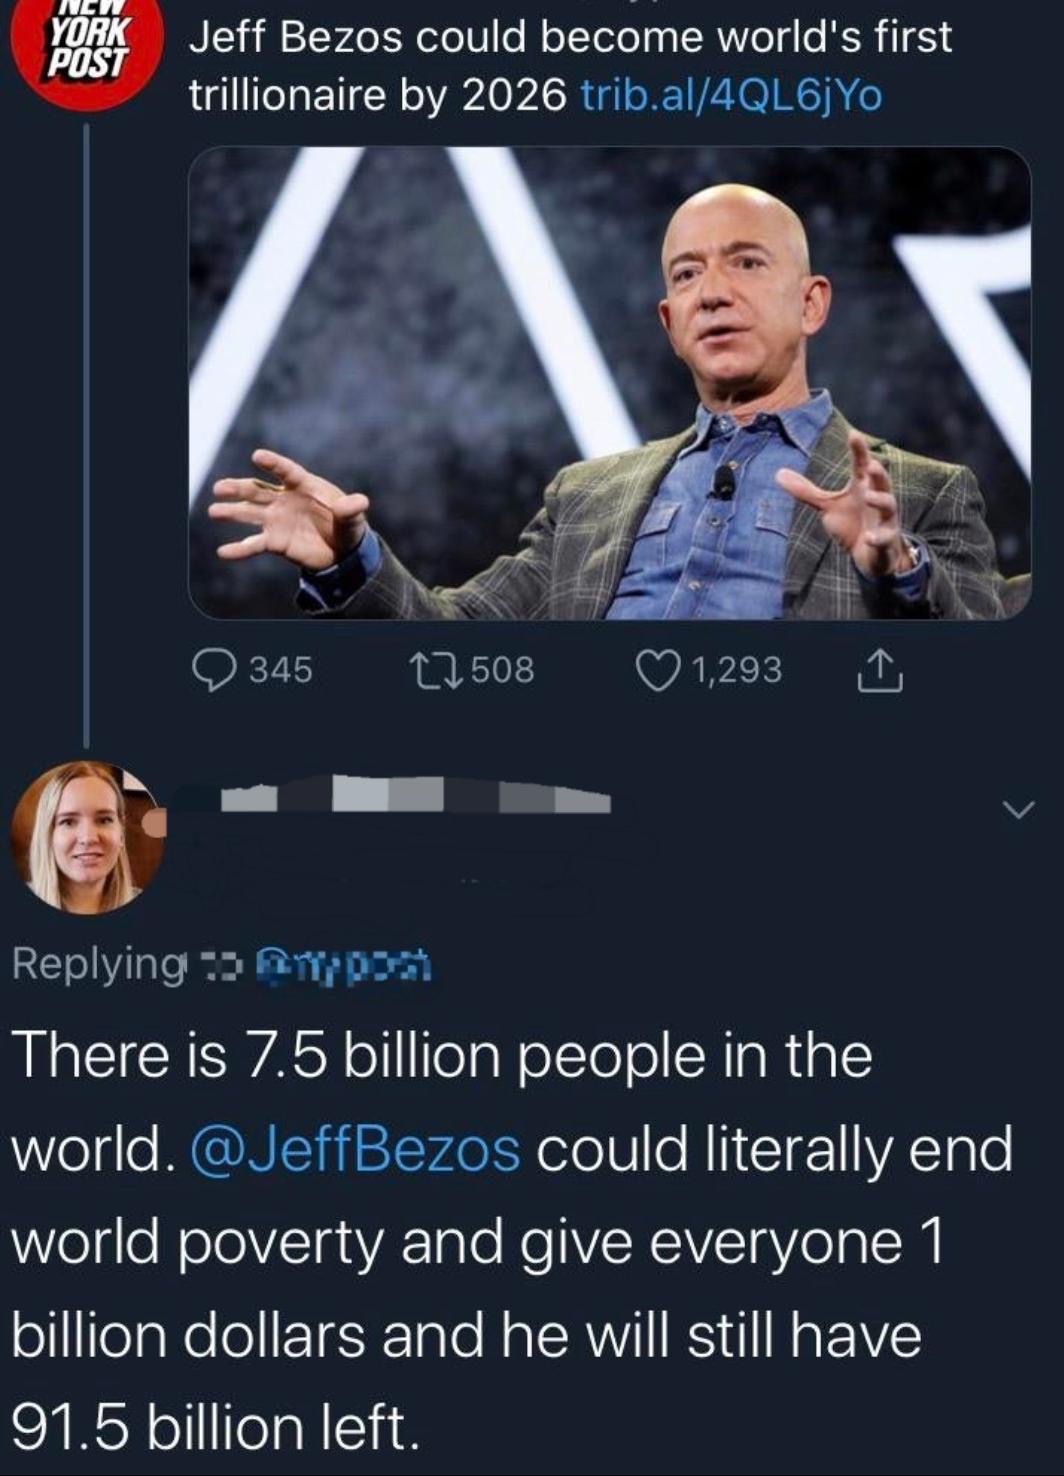 new york post - York Post Jeff Bezos could become world's first trillionaire by 2026 trib.al4QL6jYo 345 22508 1,293 I ing 3 At There is 7.5 billion people in the world. could literally end world poverty and give everyone 1 billion dollars and he will stil